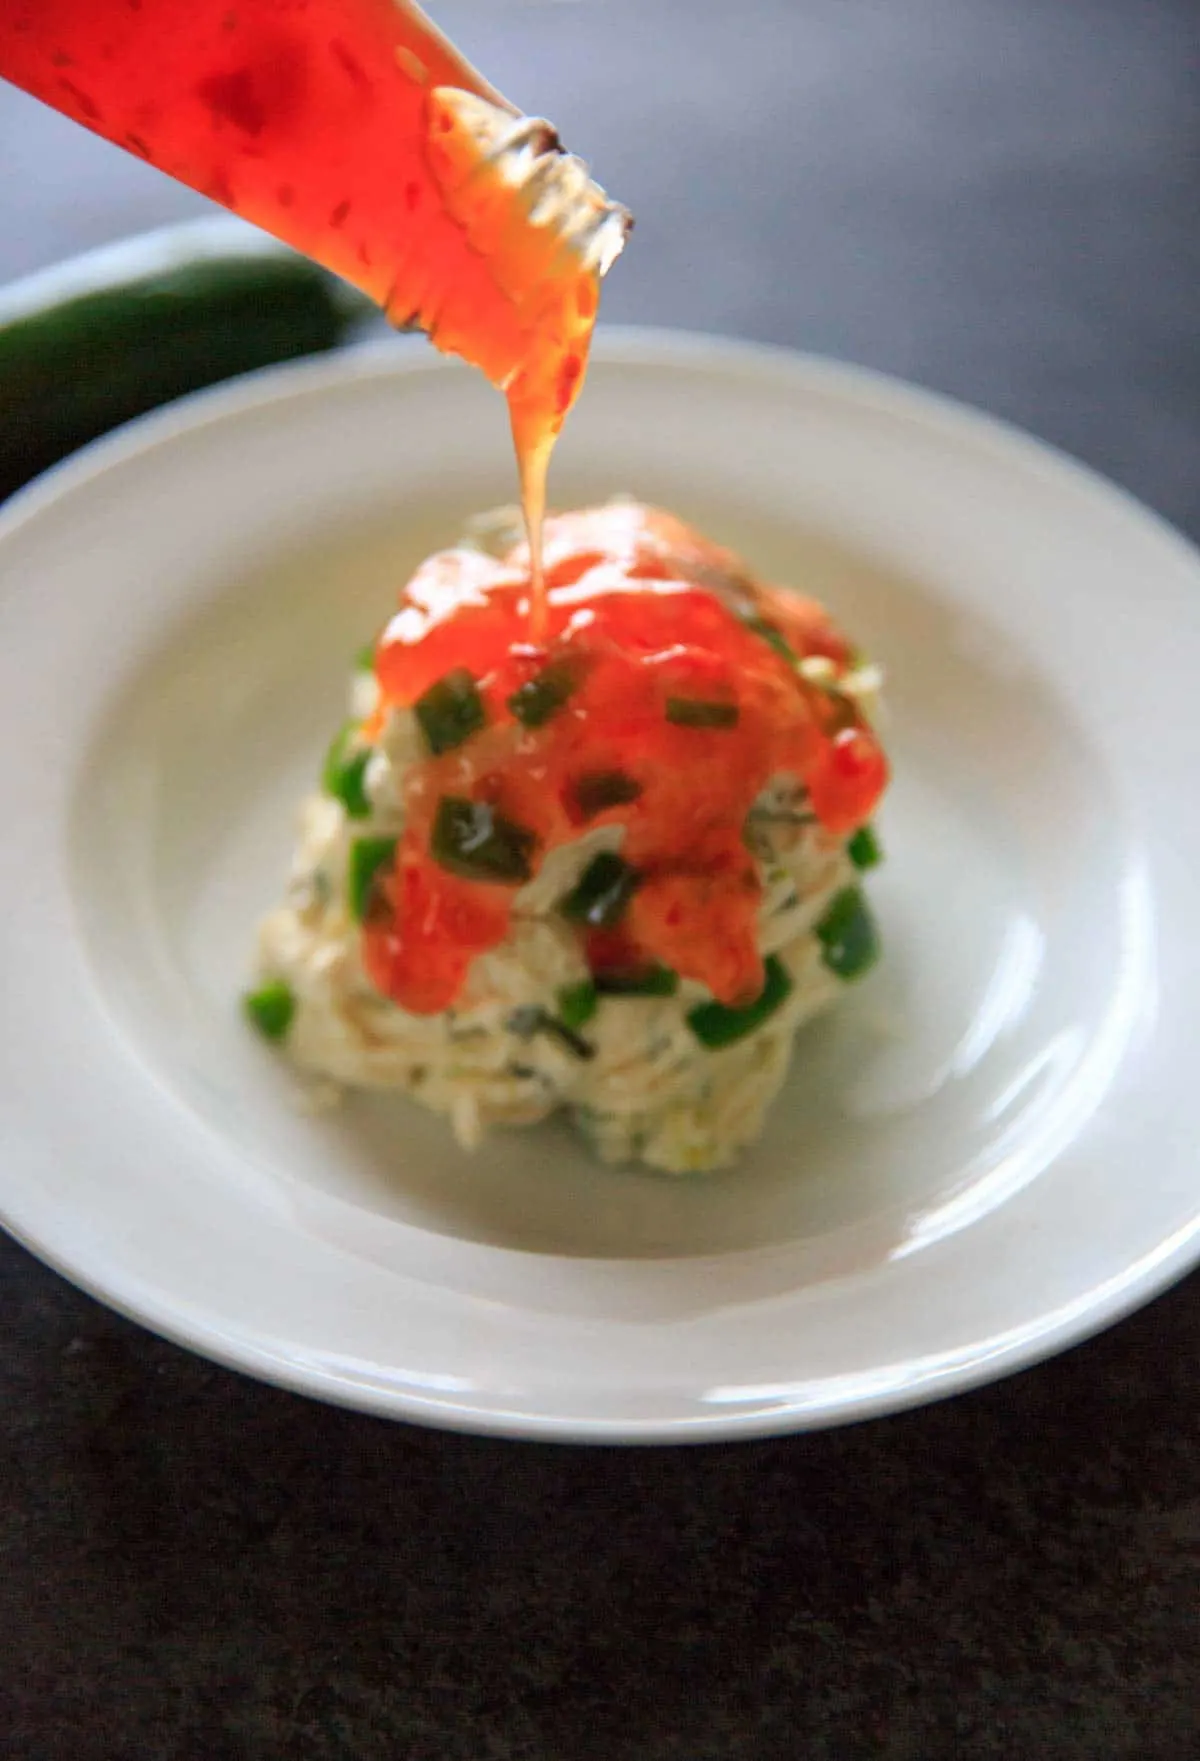 Pouring sweet chili sauce over the jalapeno cream cheese ball